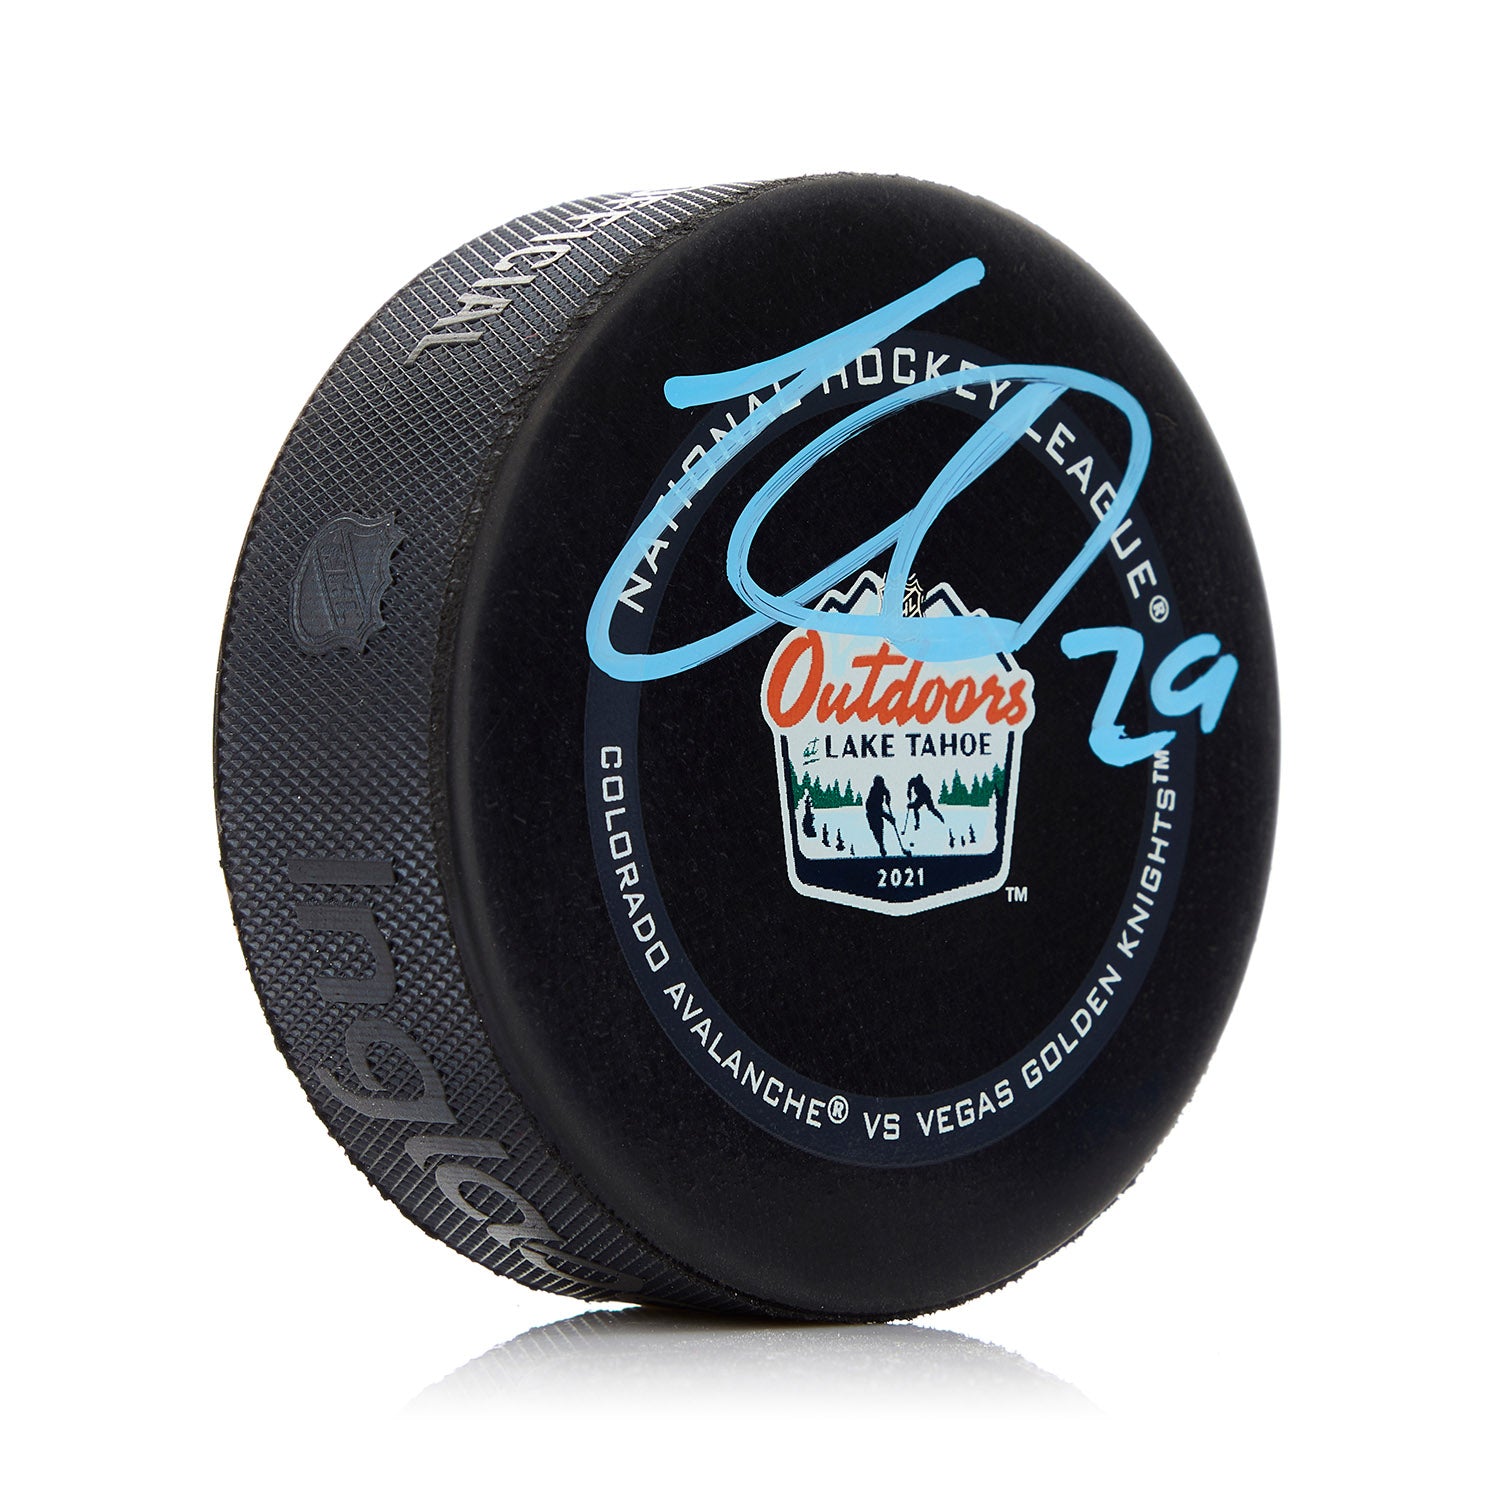 Nathan MacKinnon Lake Tahoe Outdoor Signed Official Game Puck